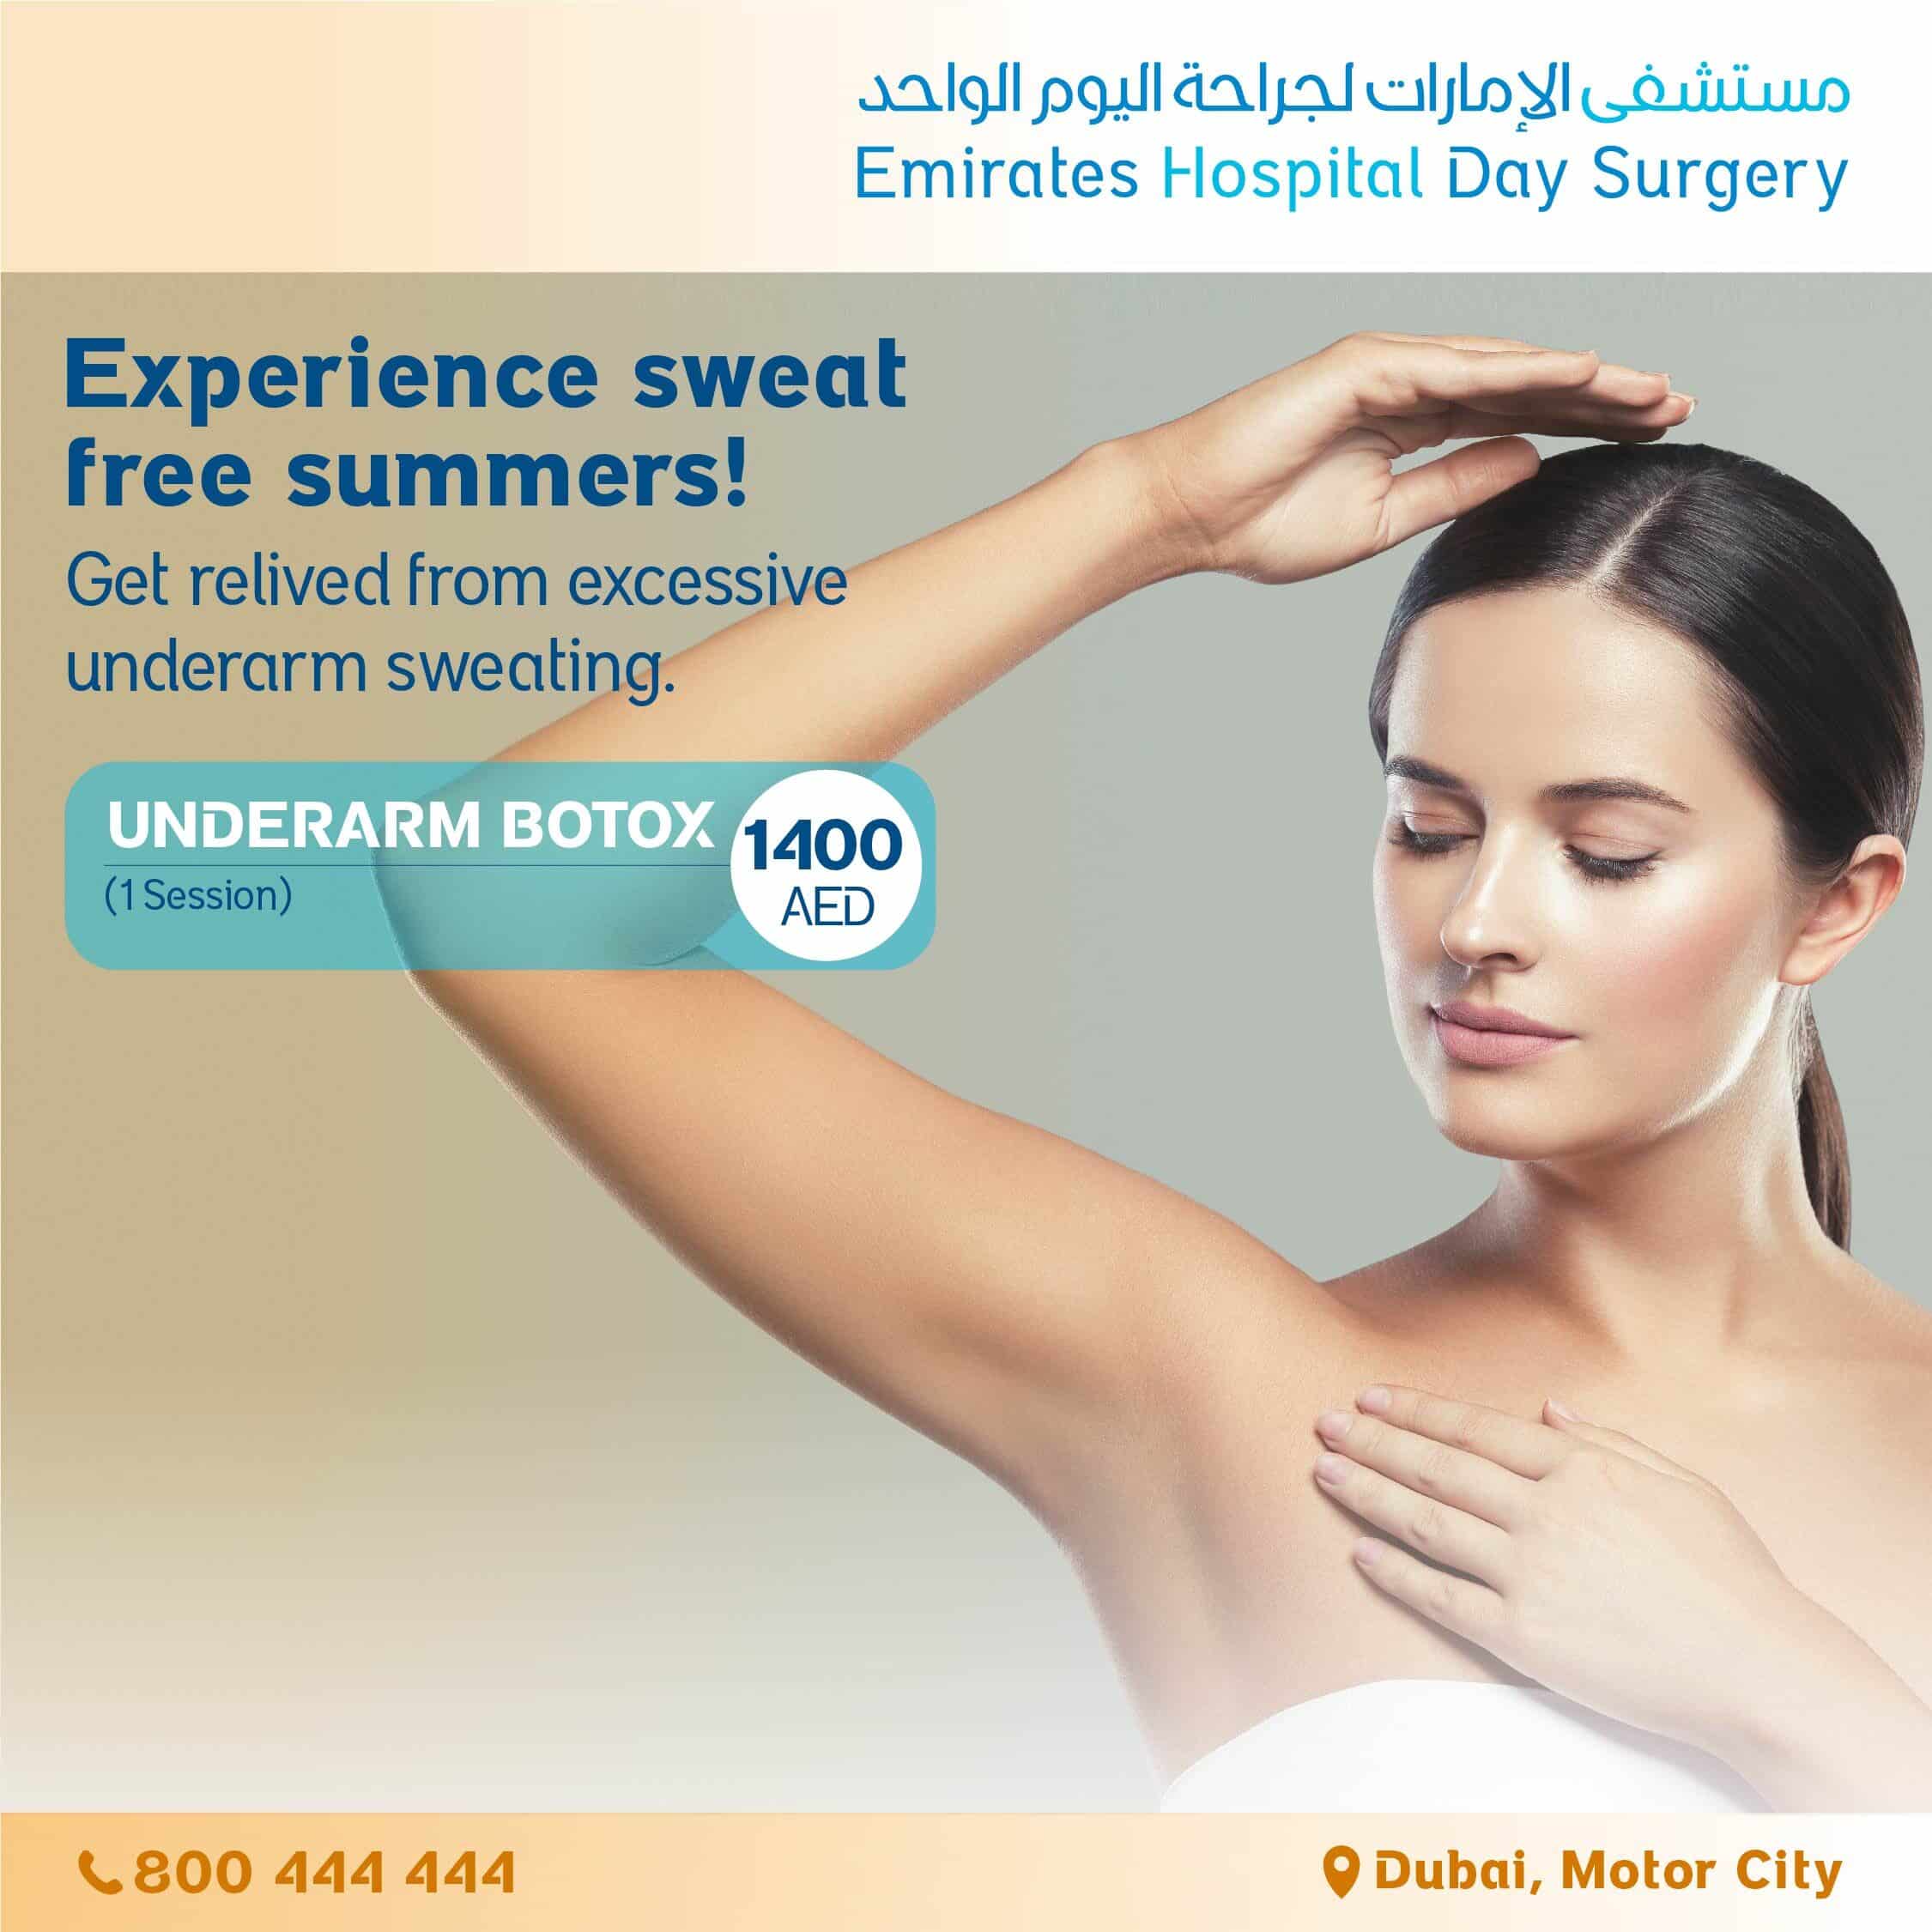 Relived Underarm Sweating Offer At Emirates Hospital Day Surgery - Motor